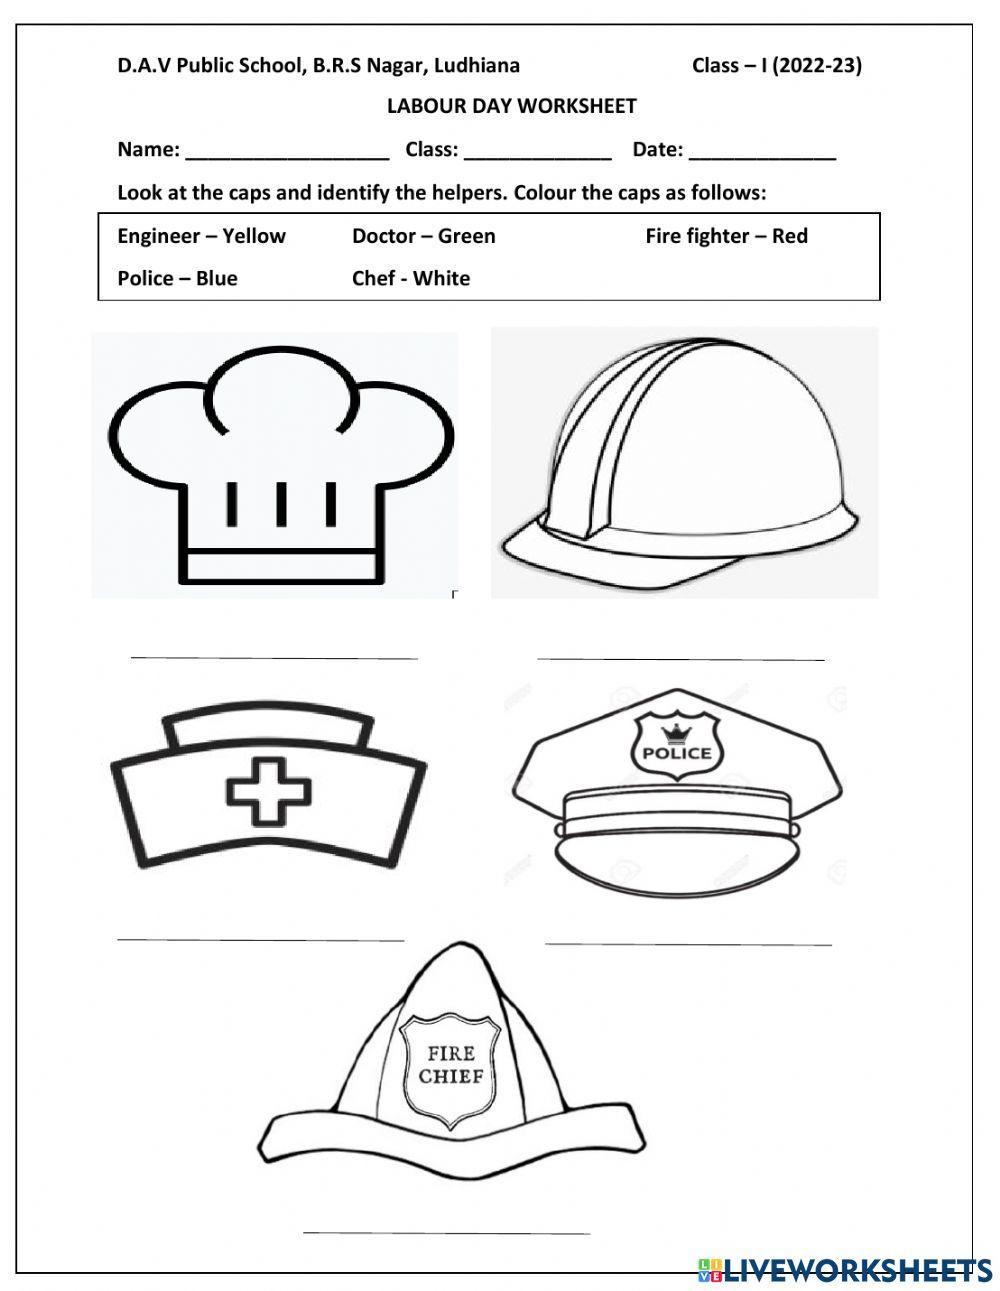 Labour Day Worksheet